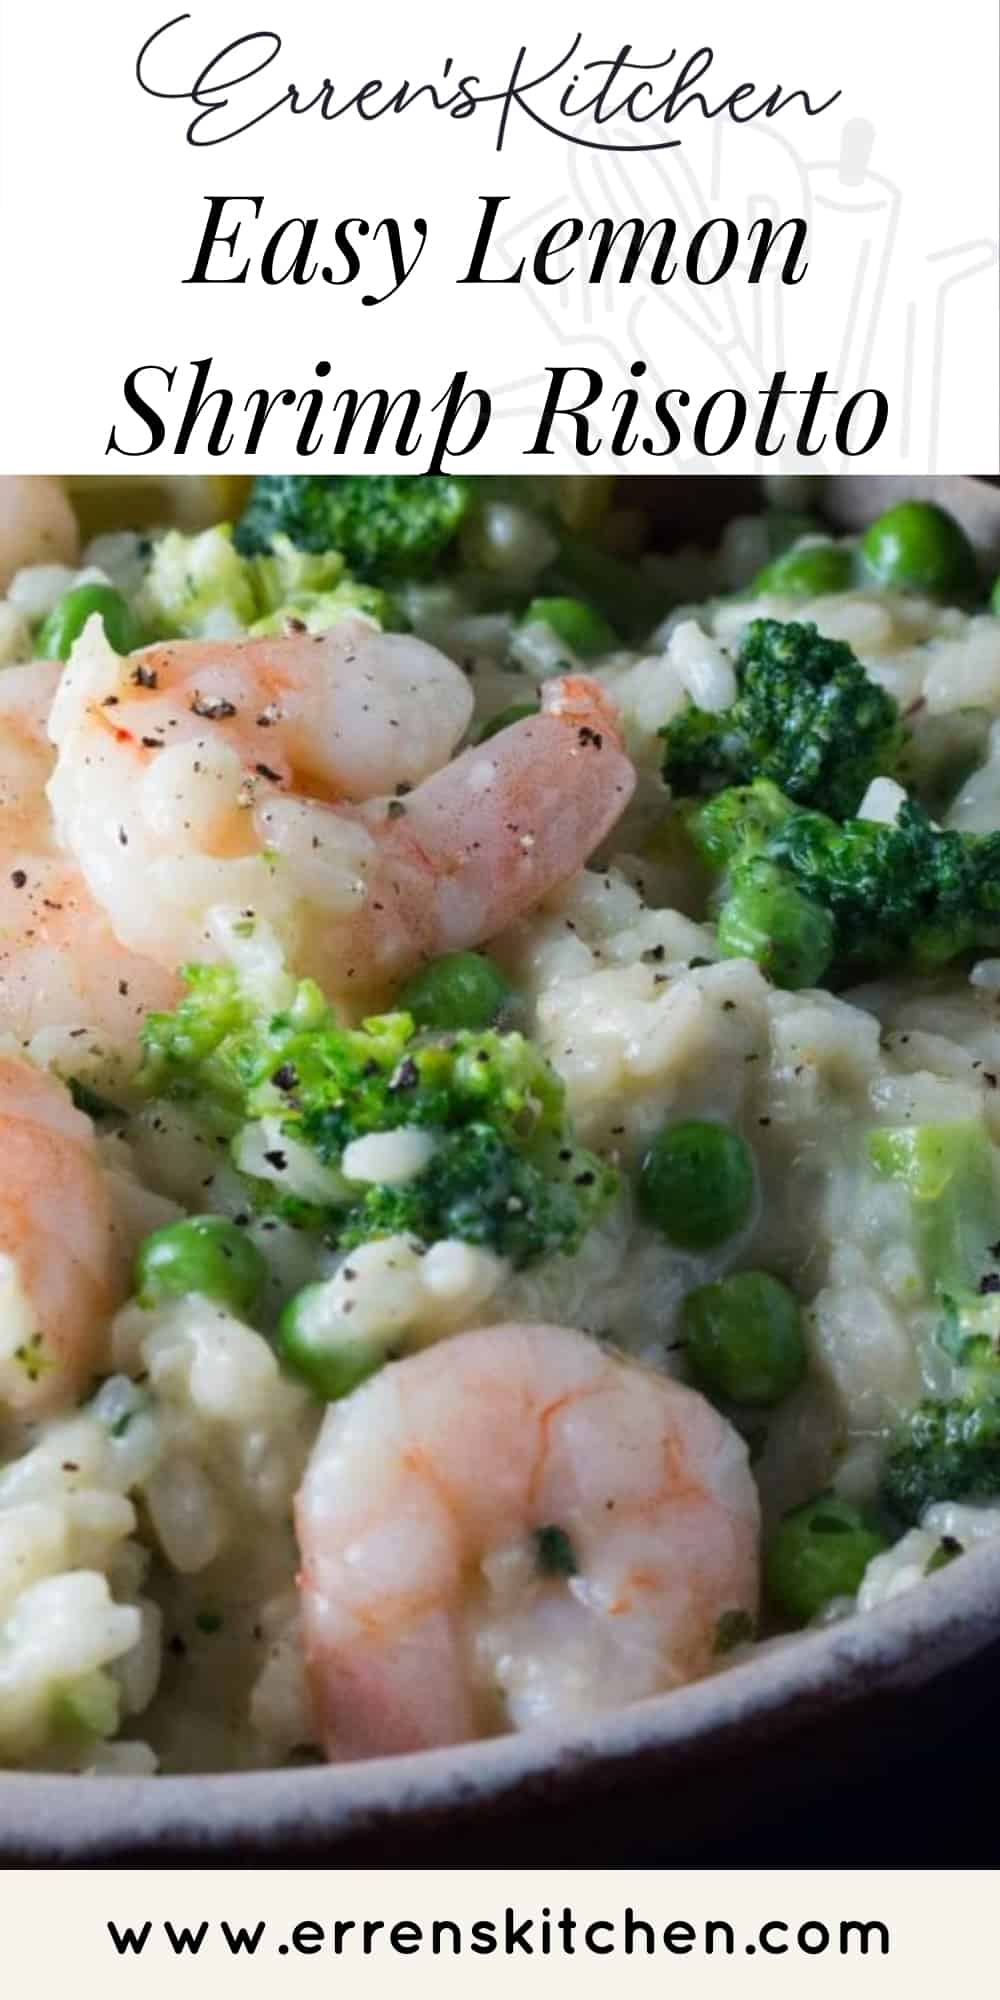 Easy Lemon Shrimp Risotto - a quick and easy risotto you'll love